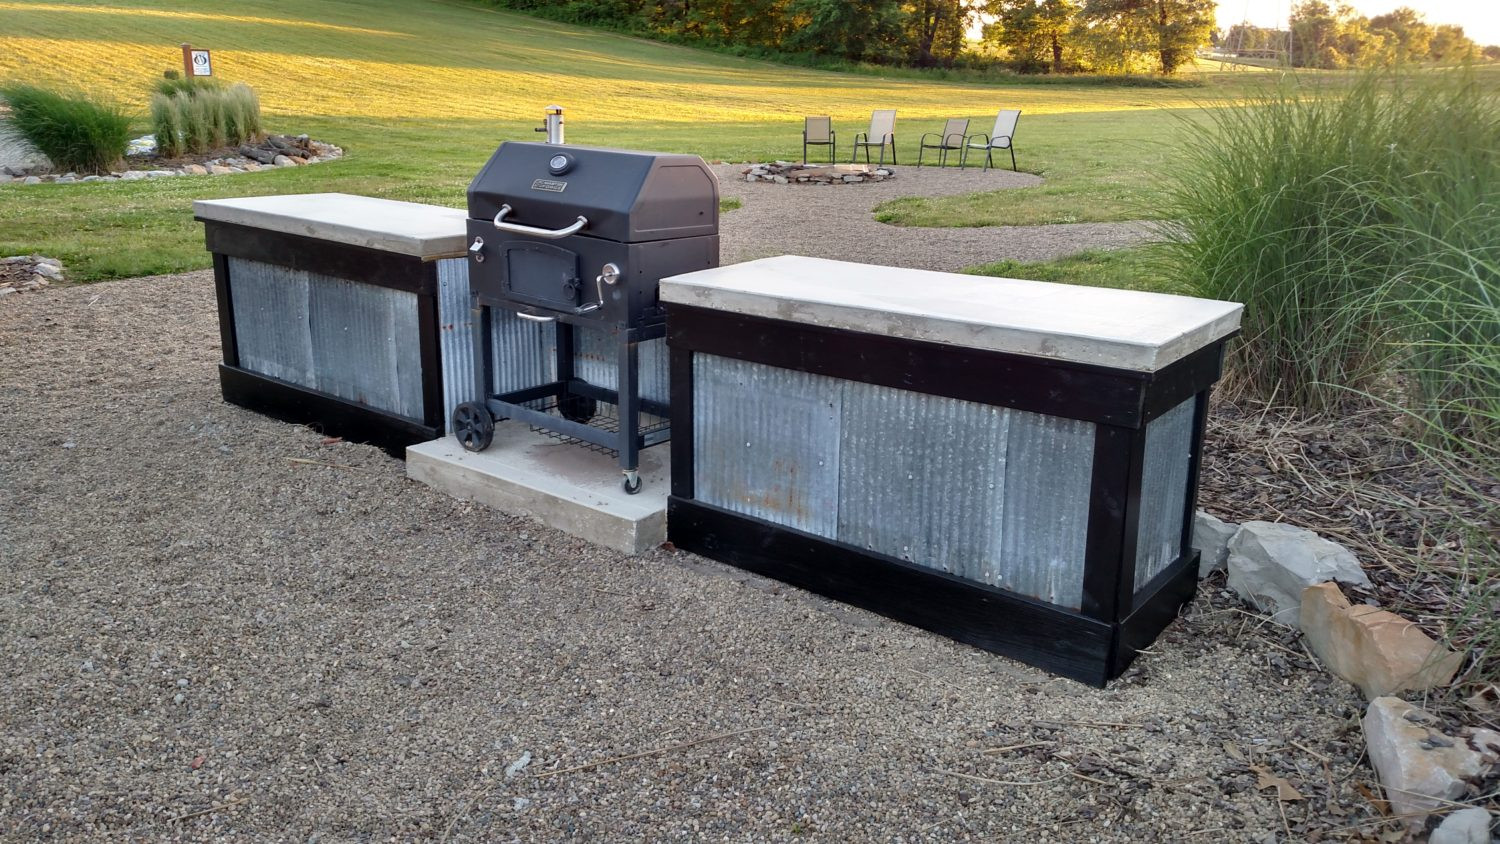 Inexpensive Outdoor Kitchen Ideas
 Creating An Inexpensive Outdoor Kitchen With Concrete